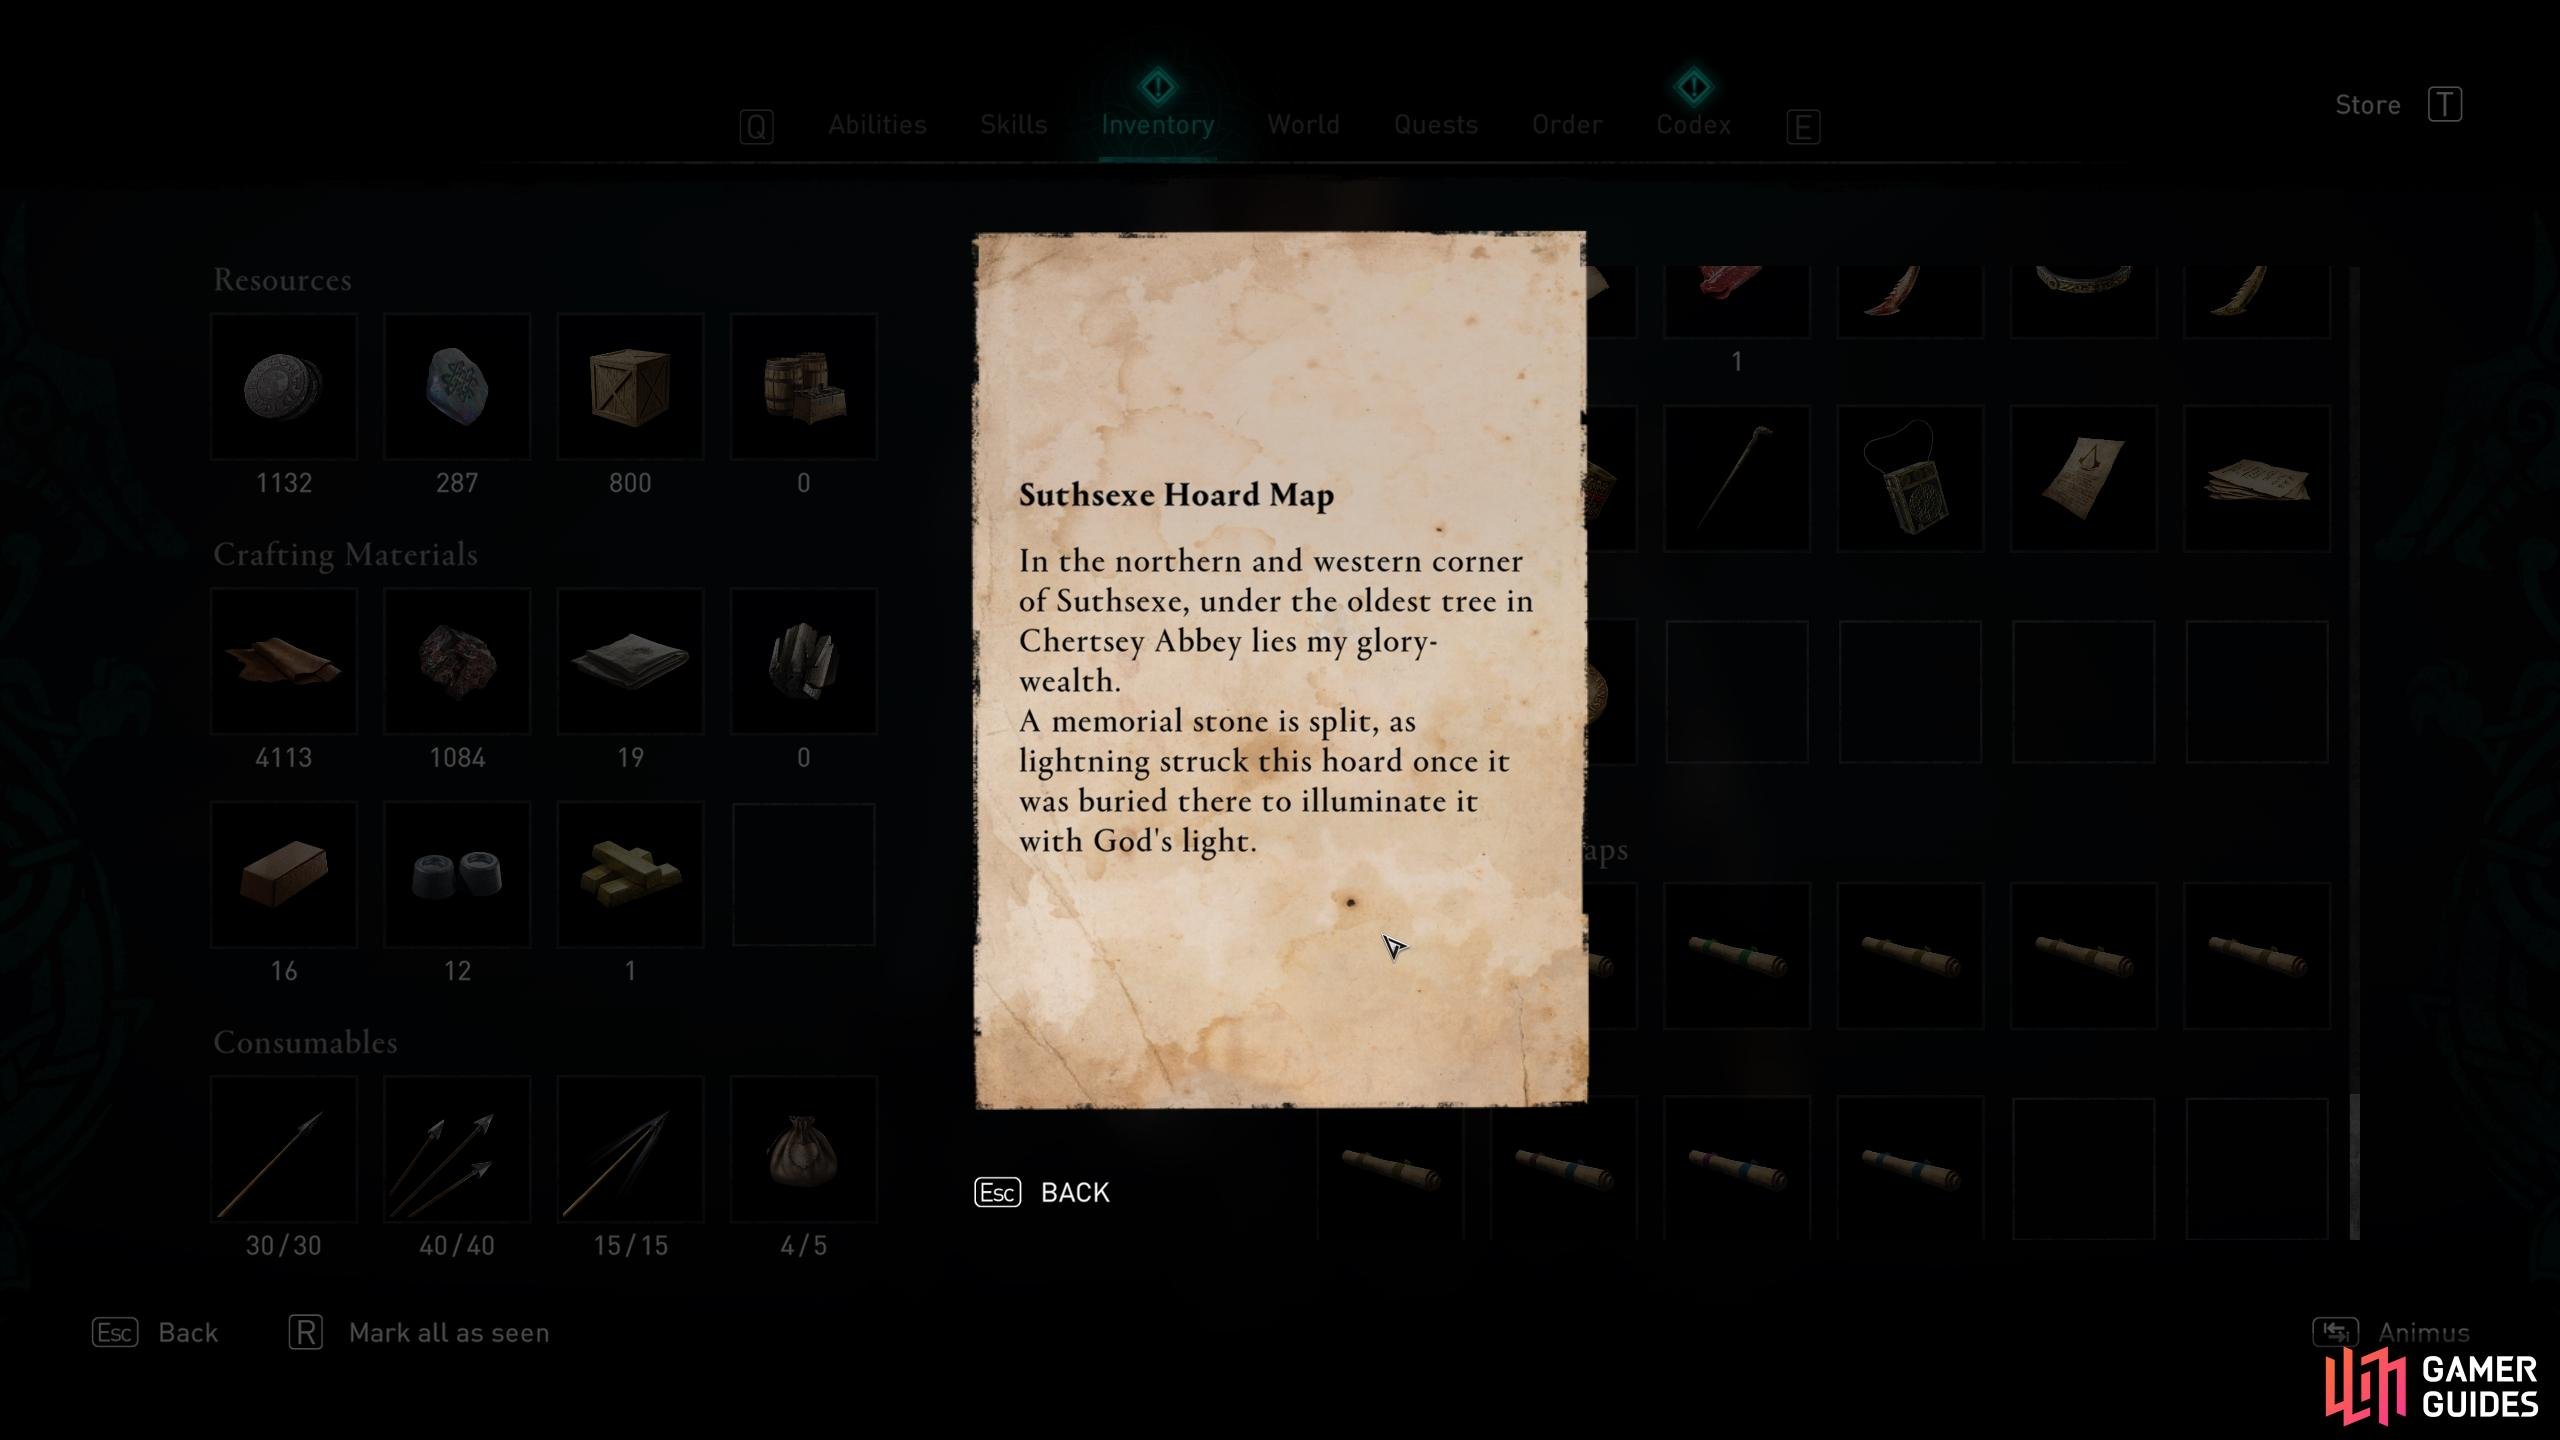 Once you've looted the map, you'll be able to view its contents from your inventory.